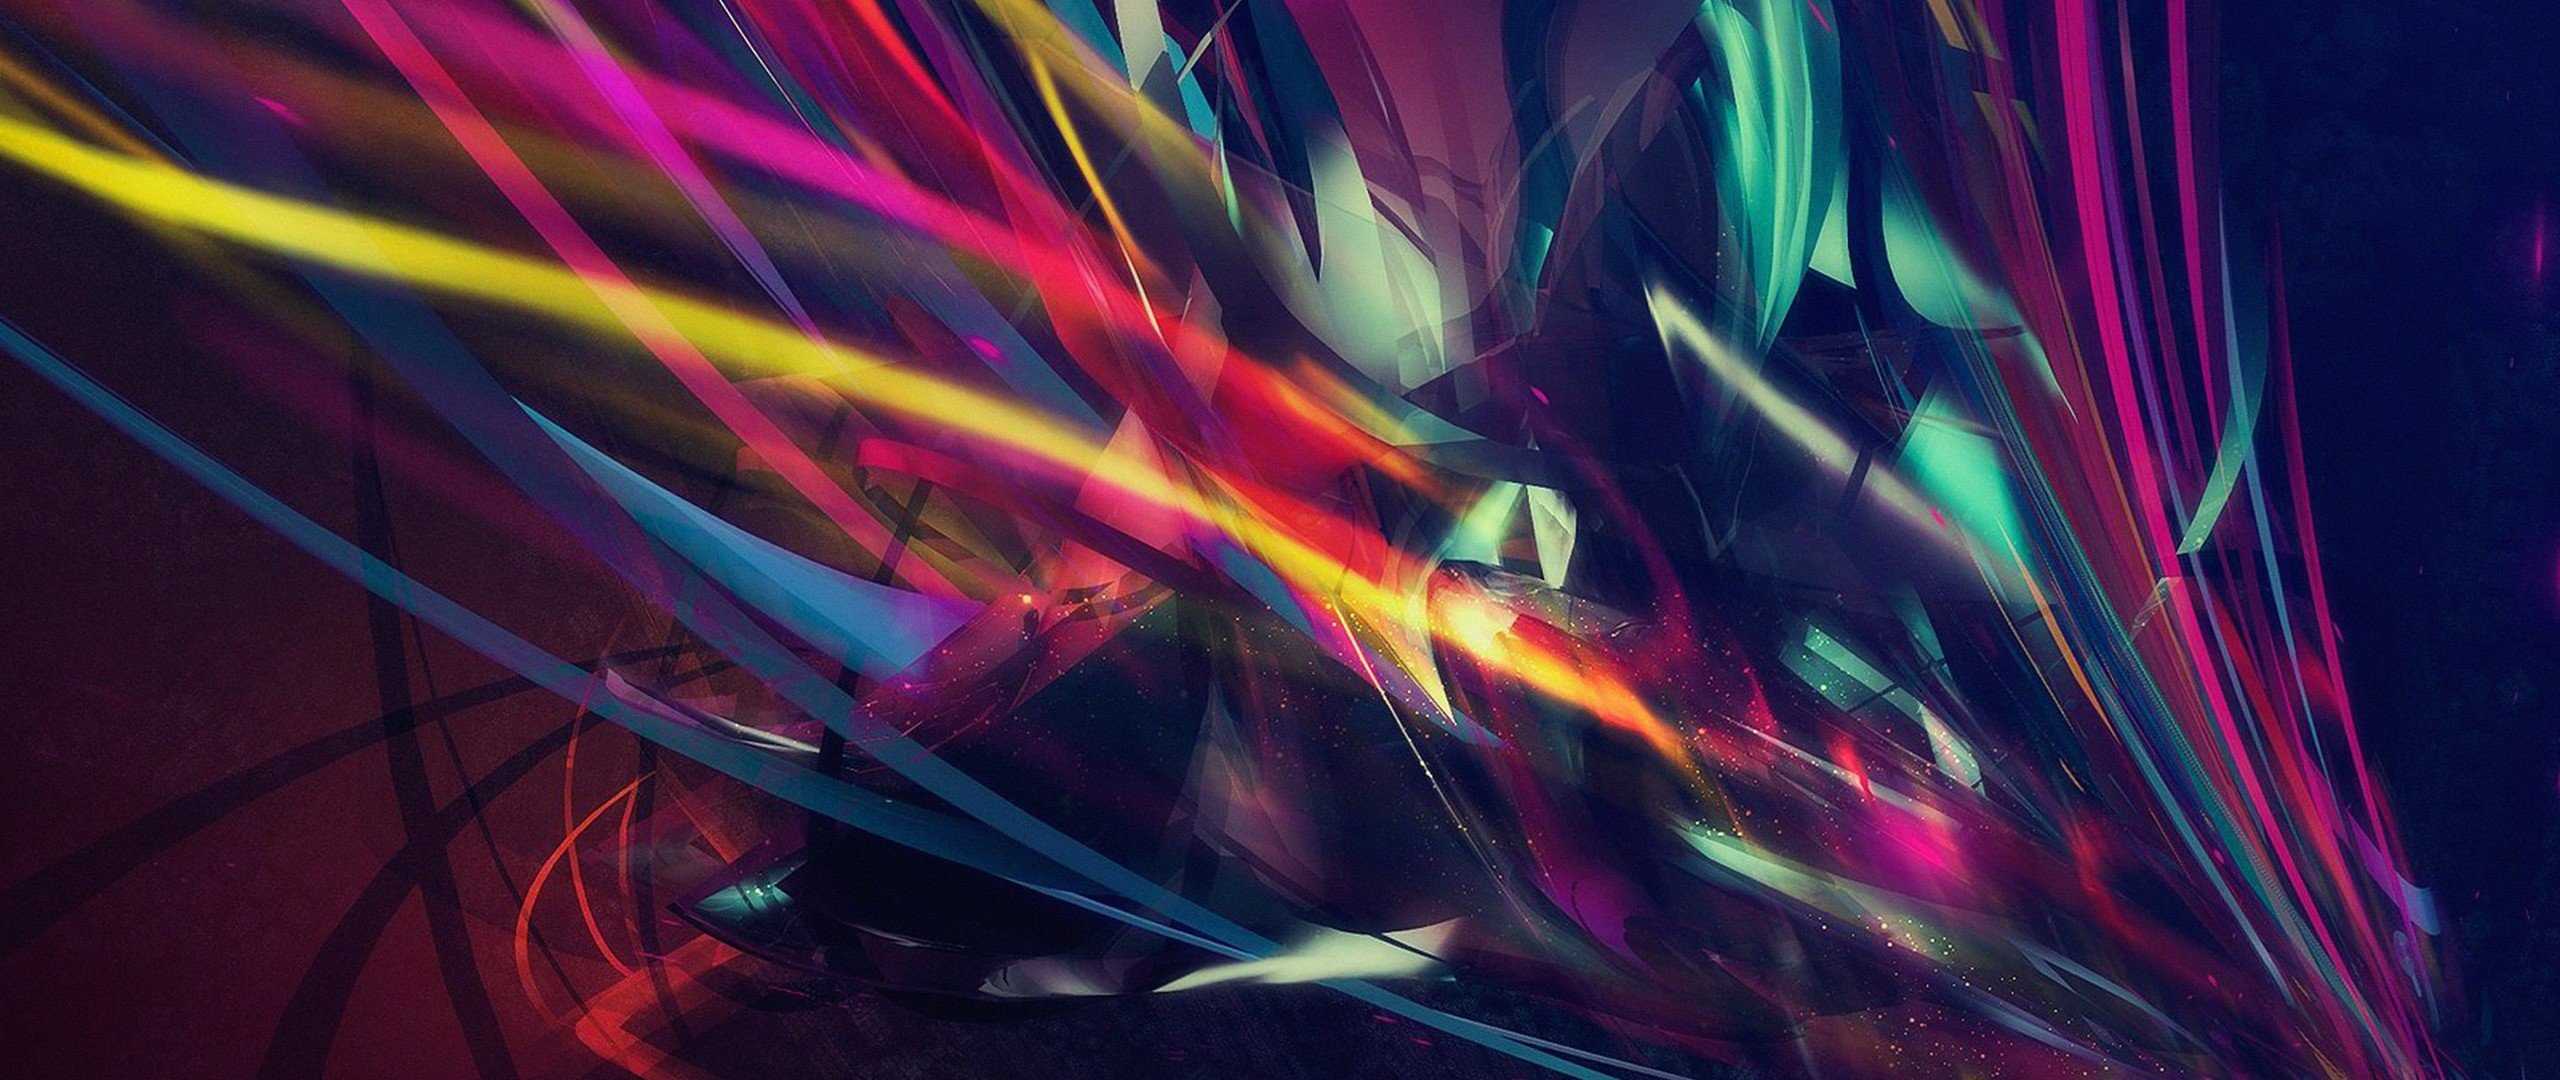 Abstract Colorful Background Hd, Abstract, Artist, - Dark Colored Abstract Art , HD Wallpaper & Backgrounds